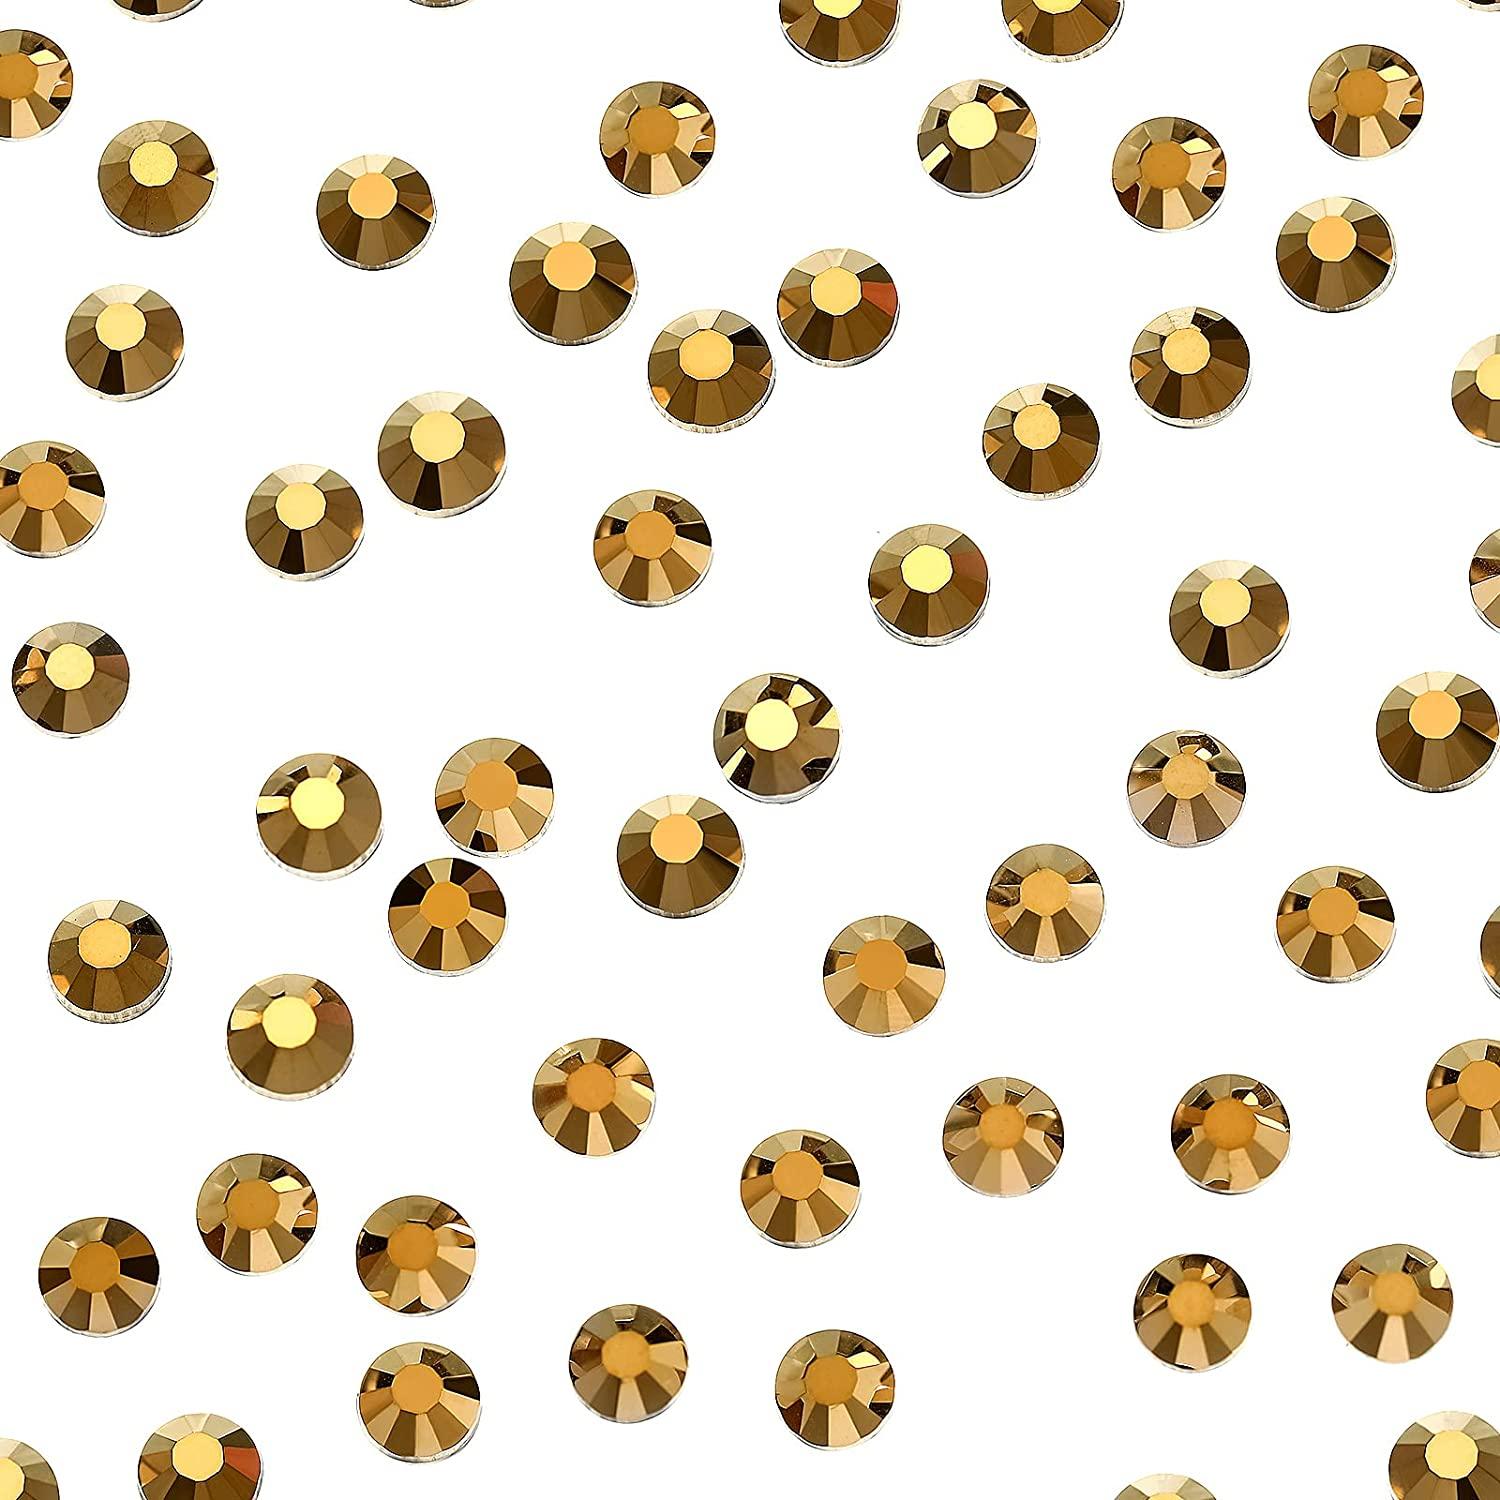 Gold Rhinestone Stock Photos and Pictures - 14,807 Images